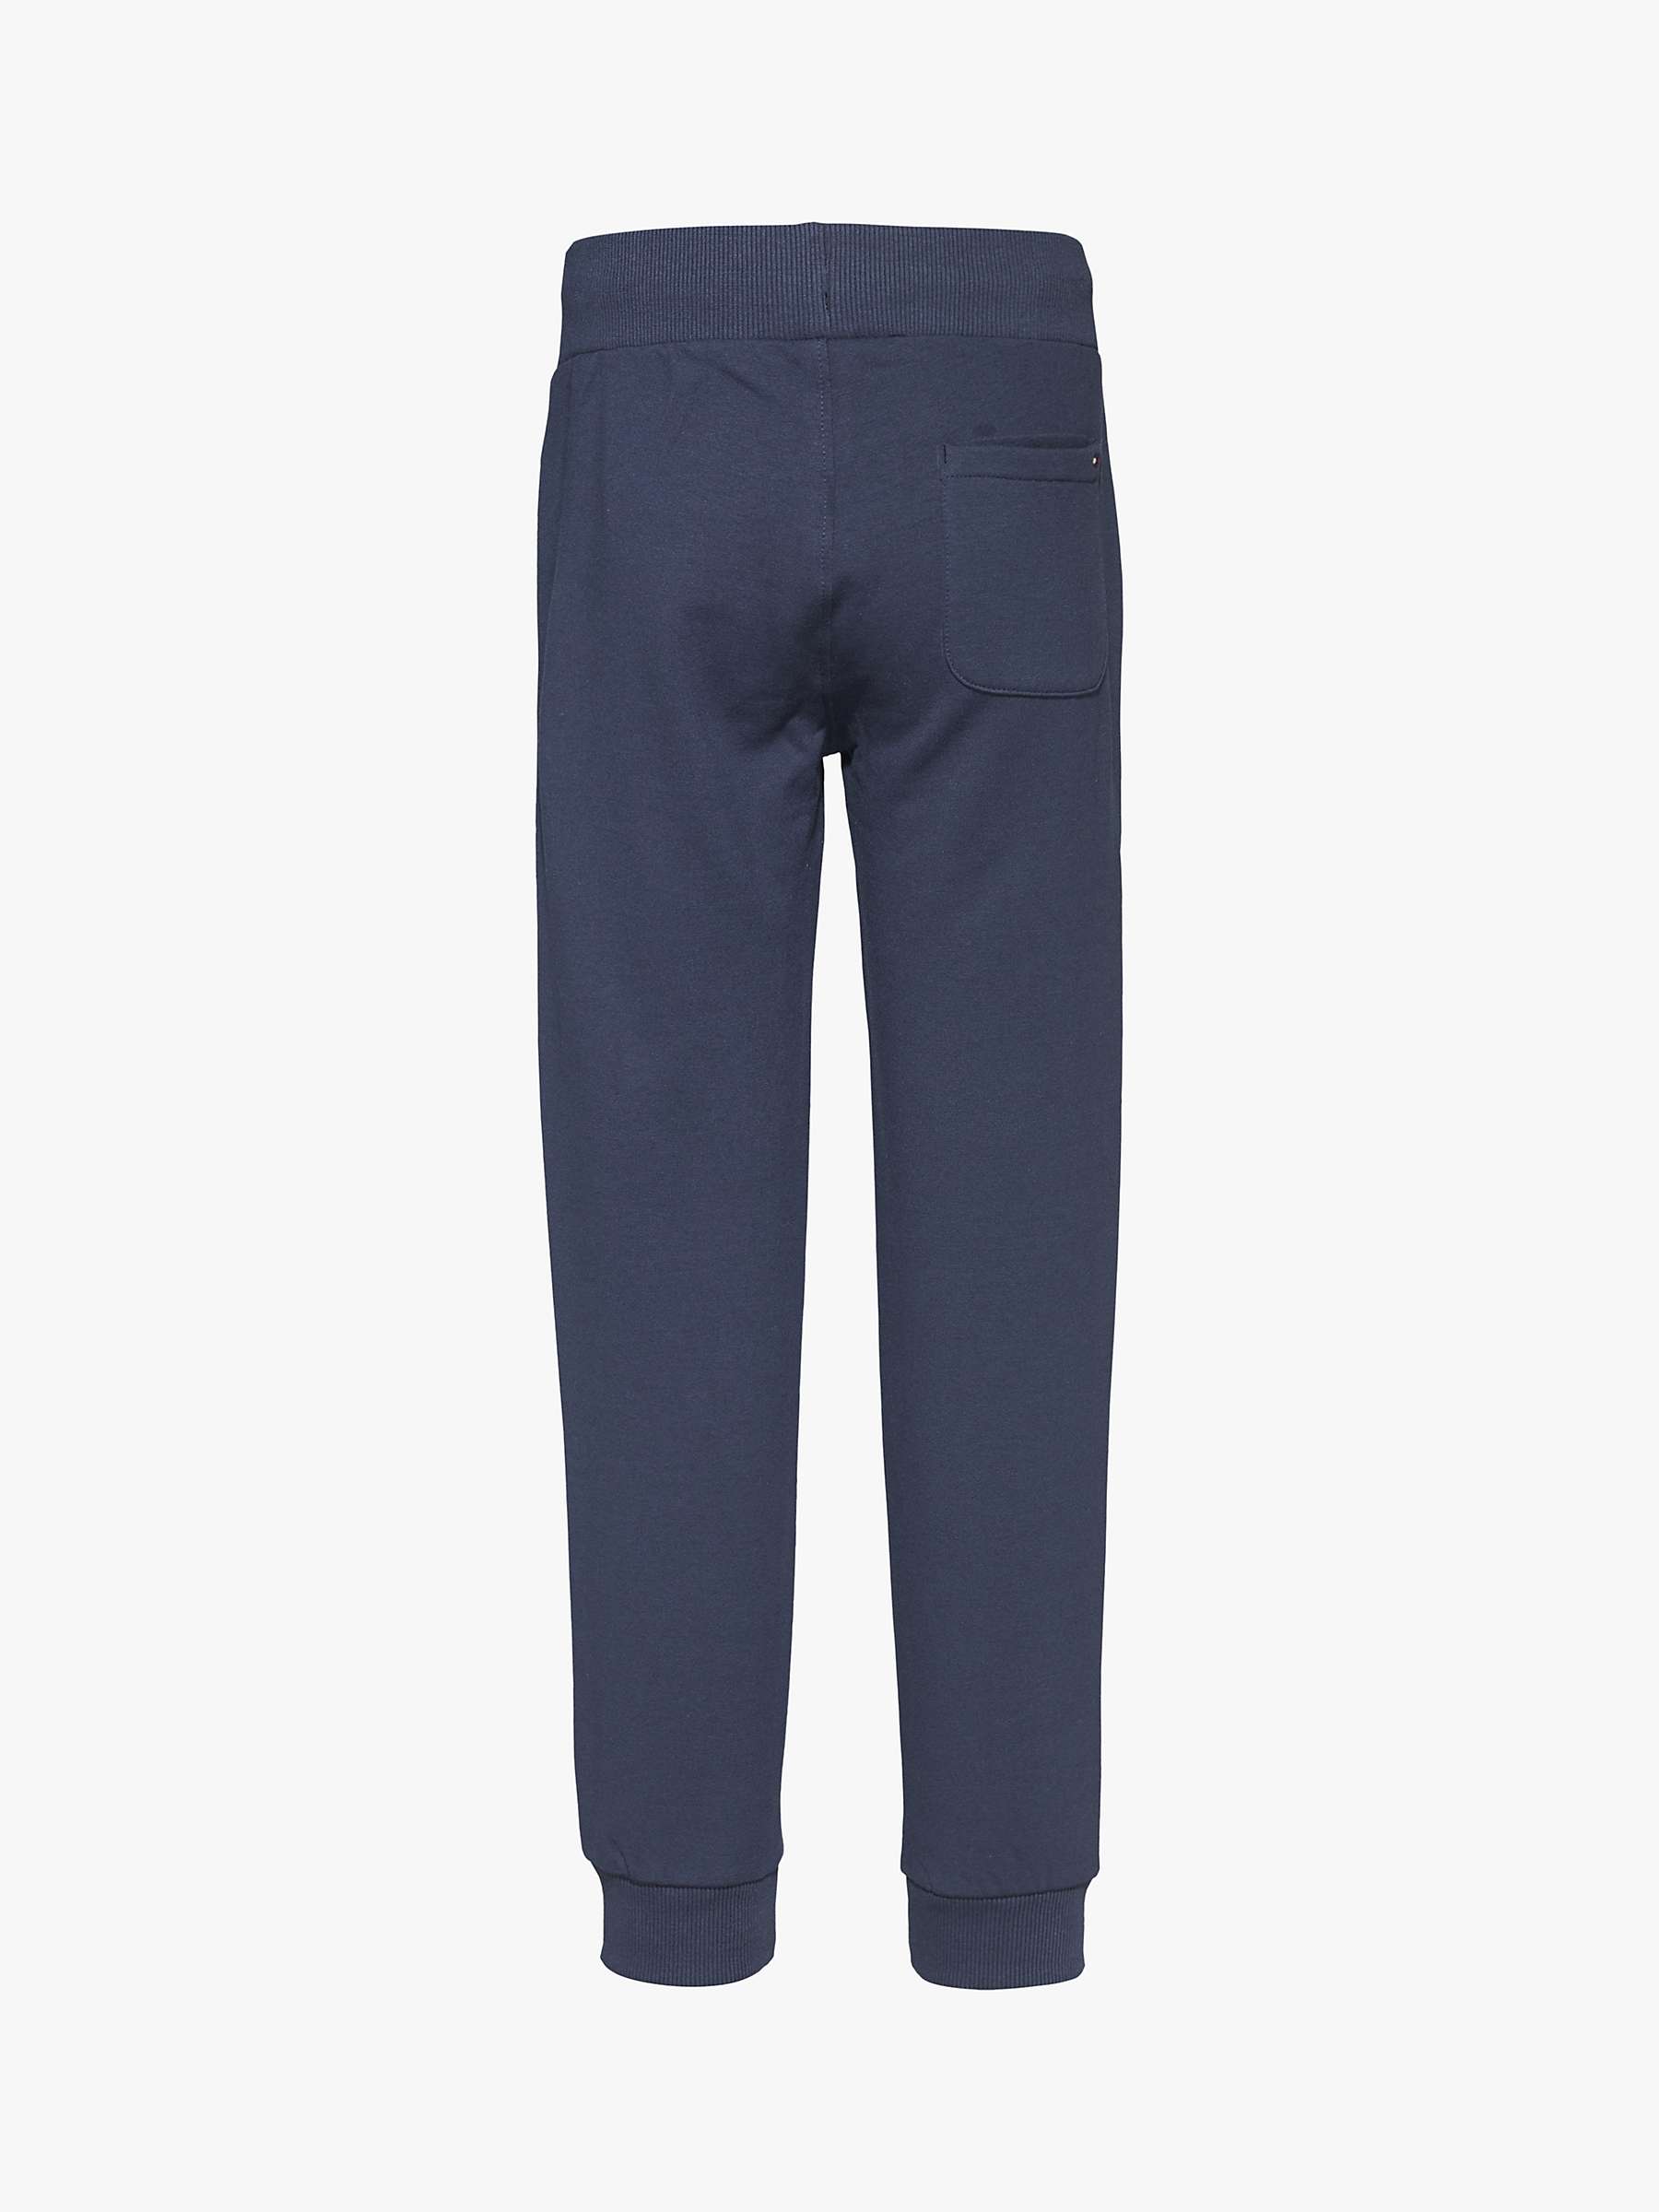 Buy Tommy Hilfiger Kids' Essential Organic Cotton Blend Tapered Joggers, Twilight Navy Online at johnlewis.com